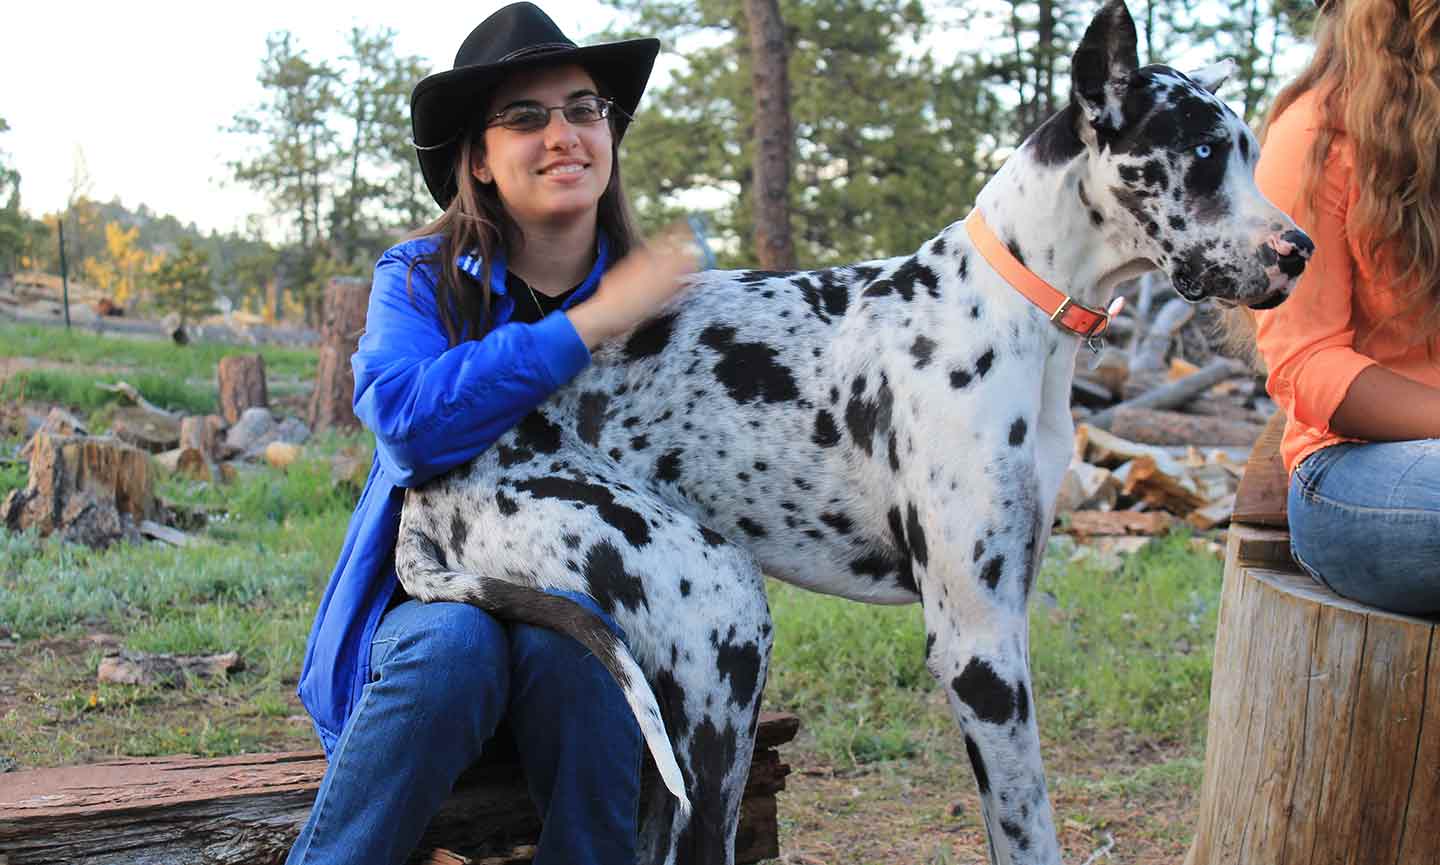 A woman wearing a cowboy hat pets a large black and white dog